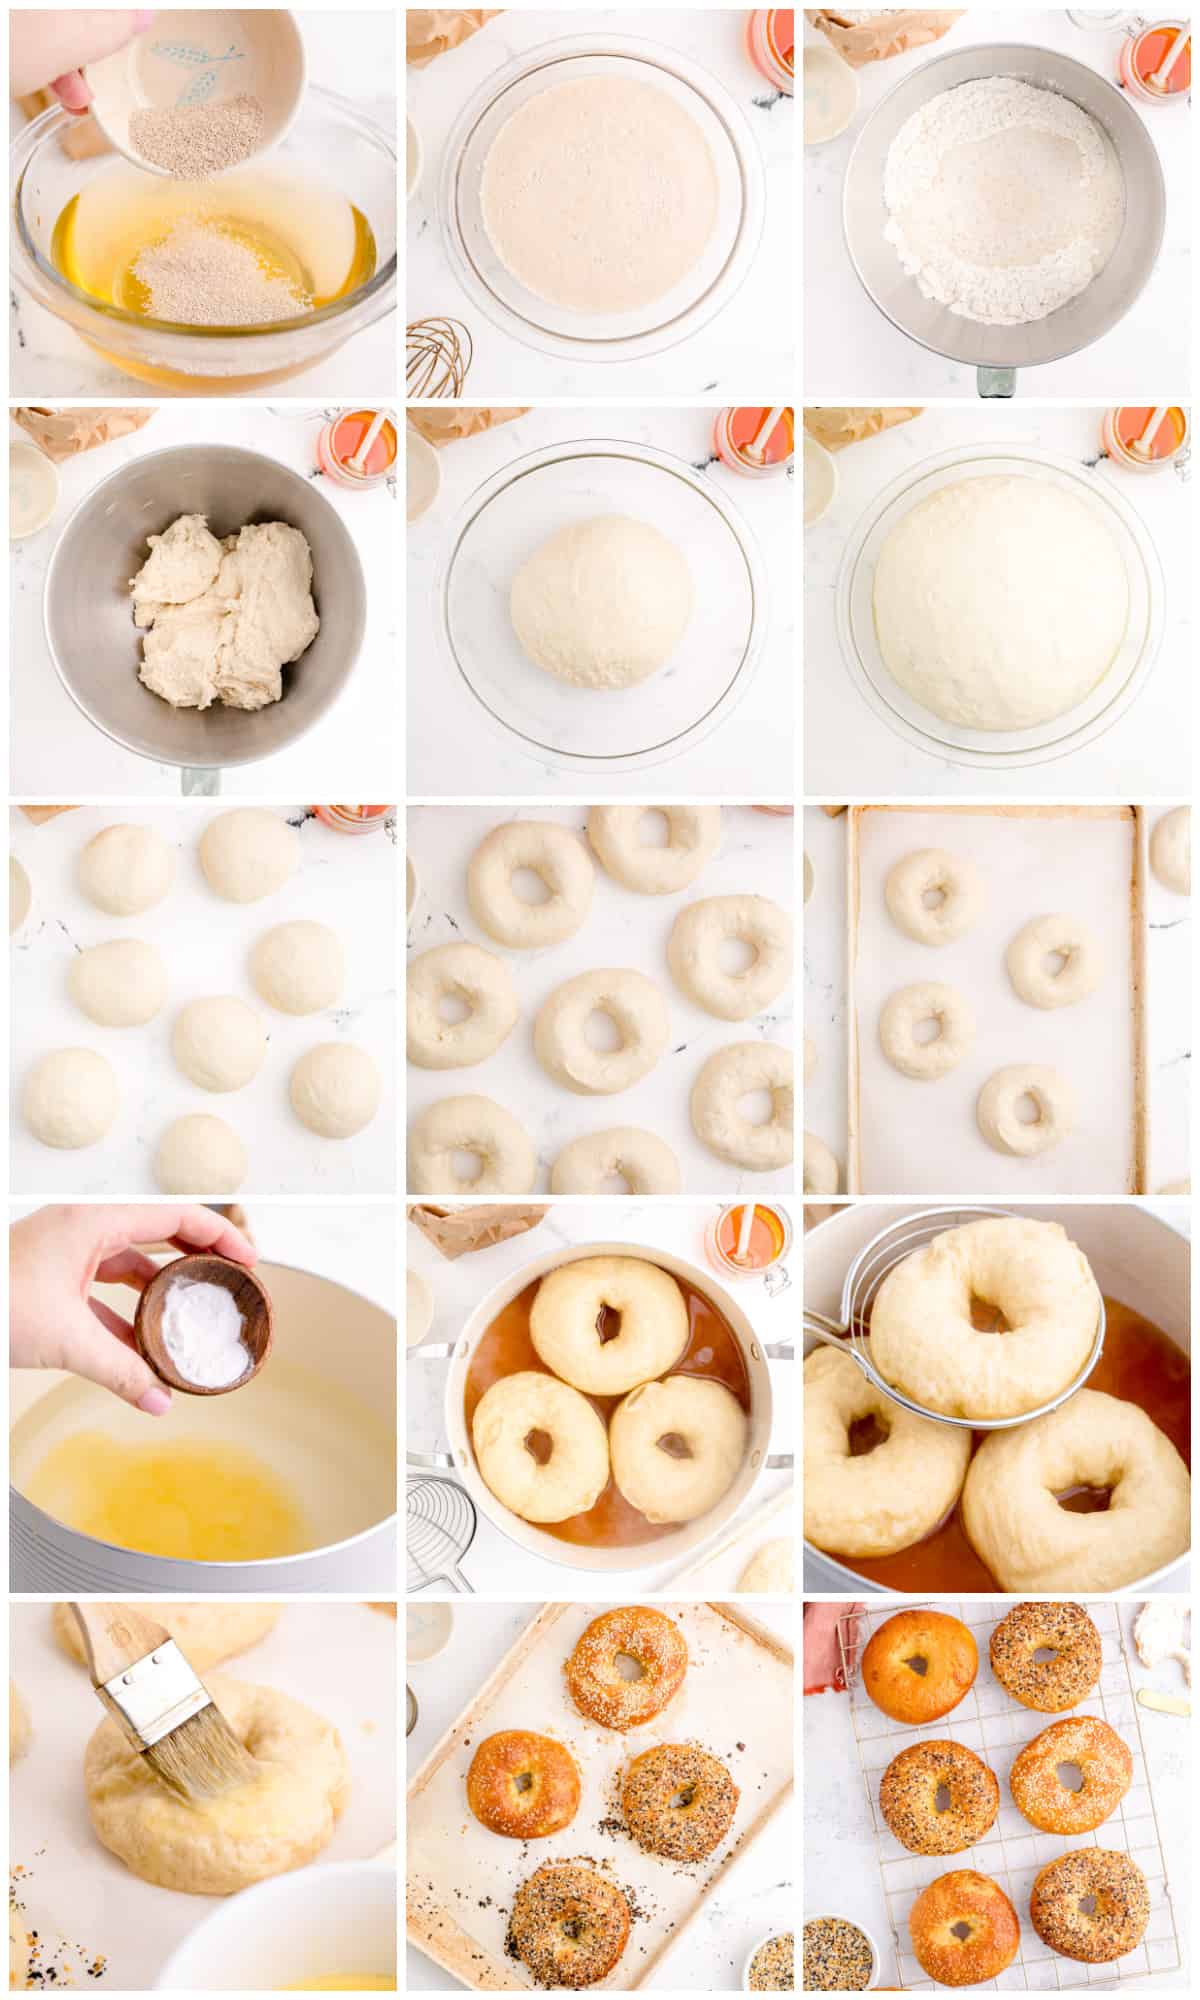 Step by step photos on how to make Homemade Bagels.